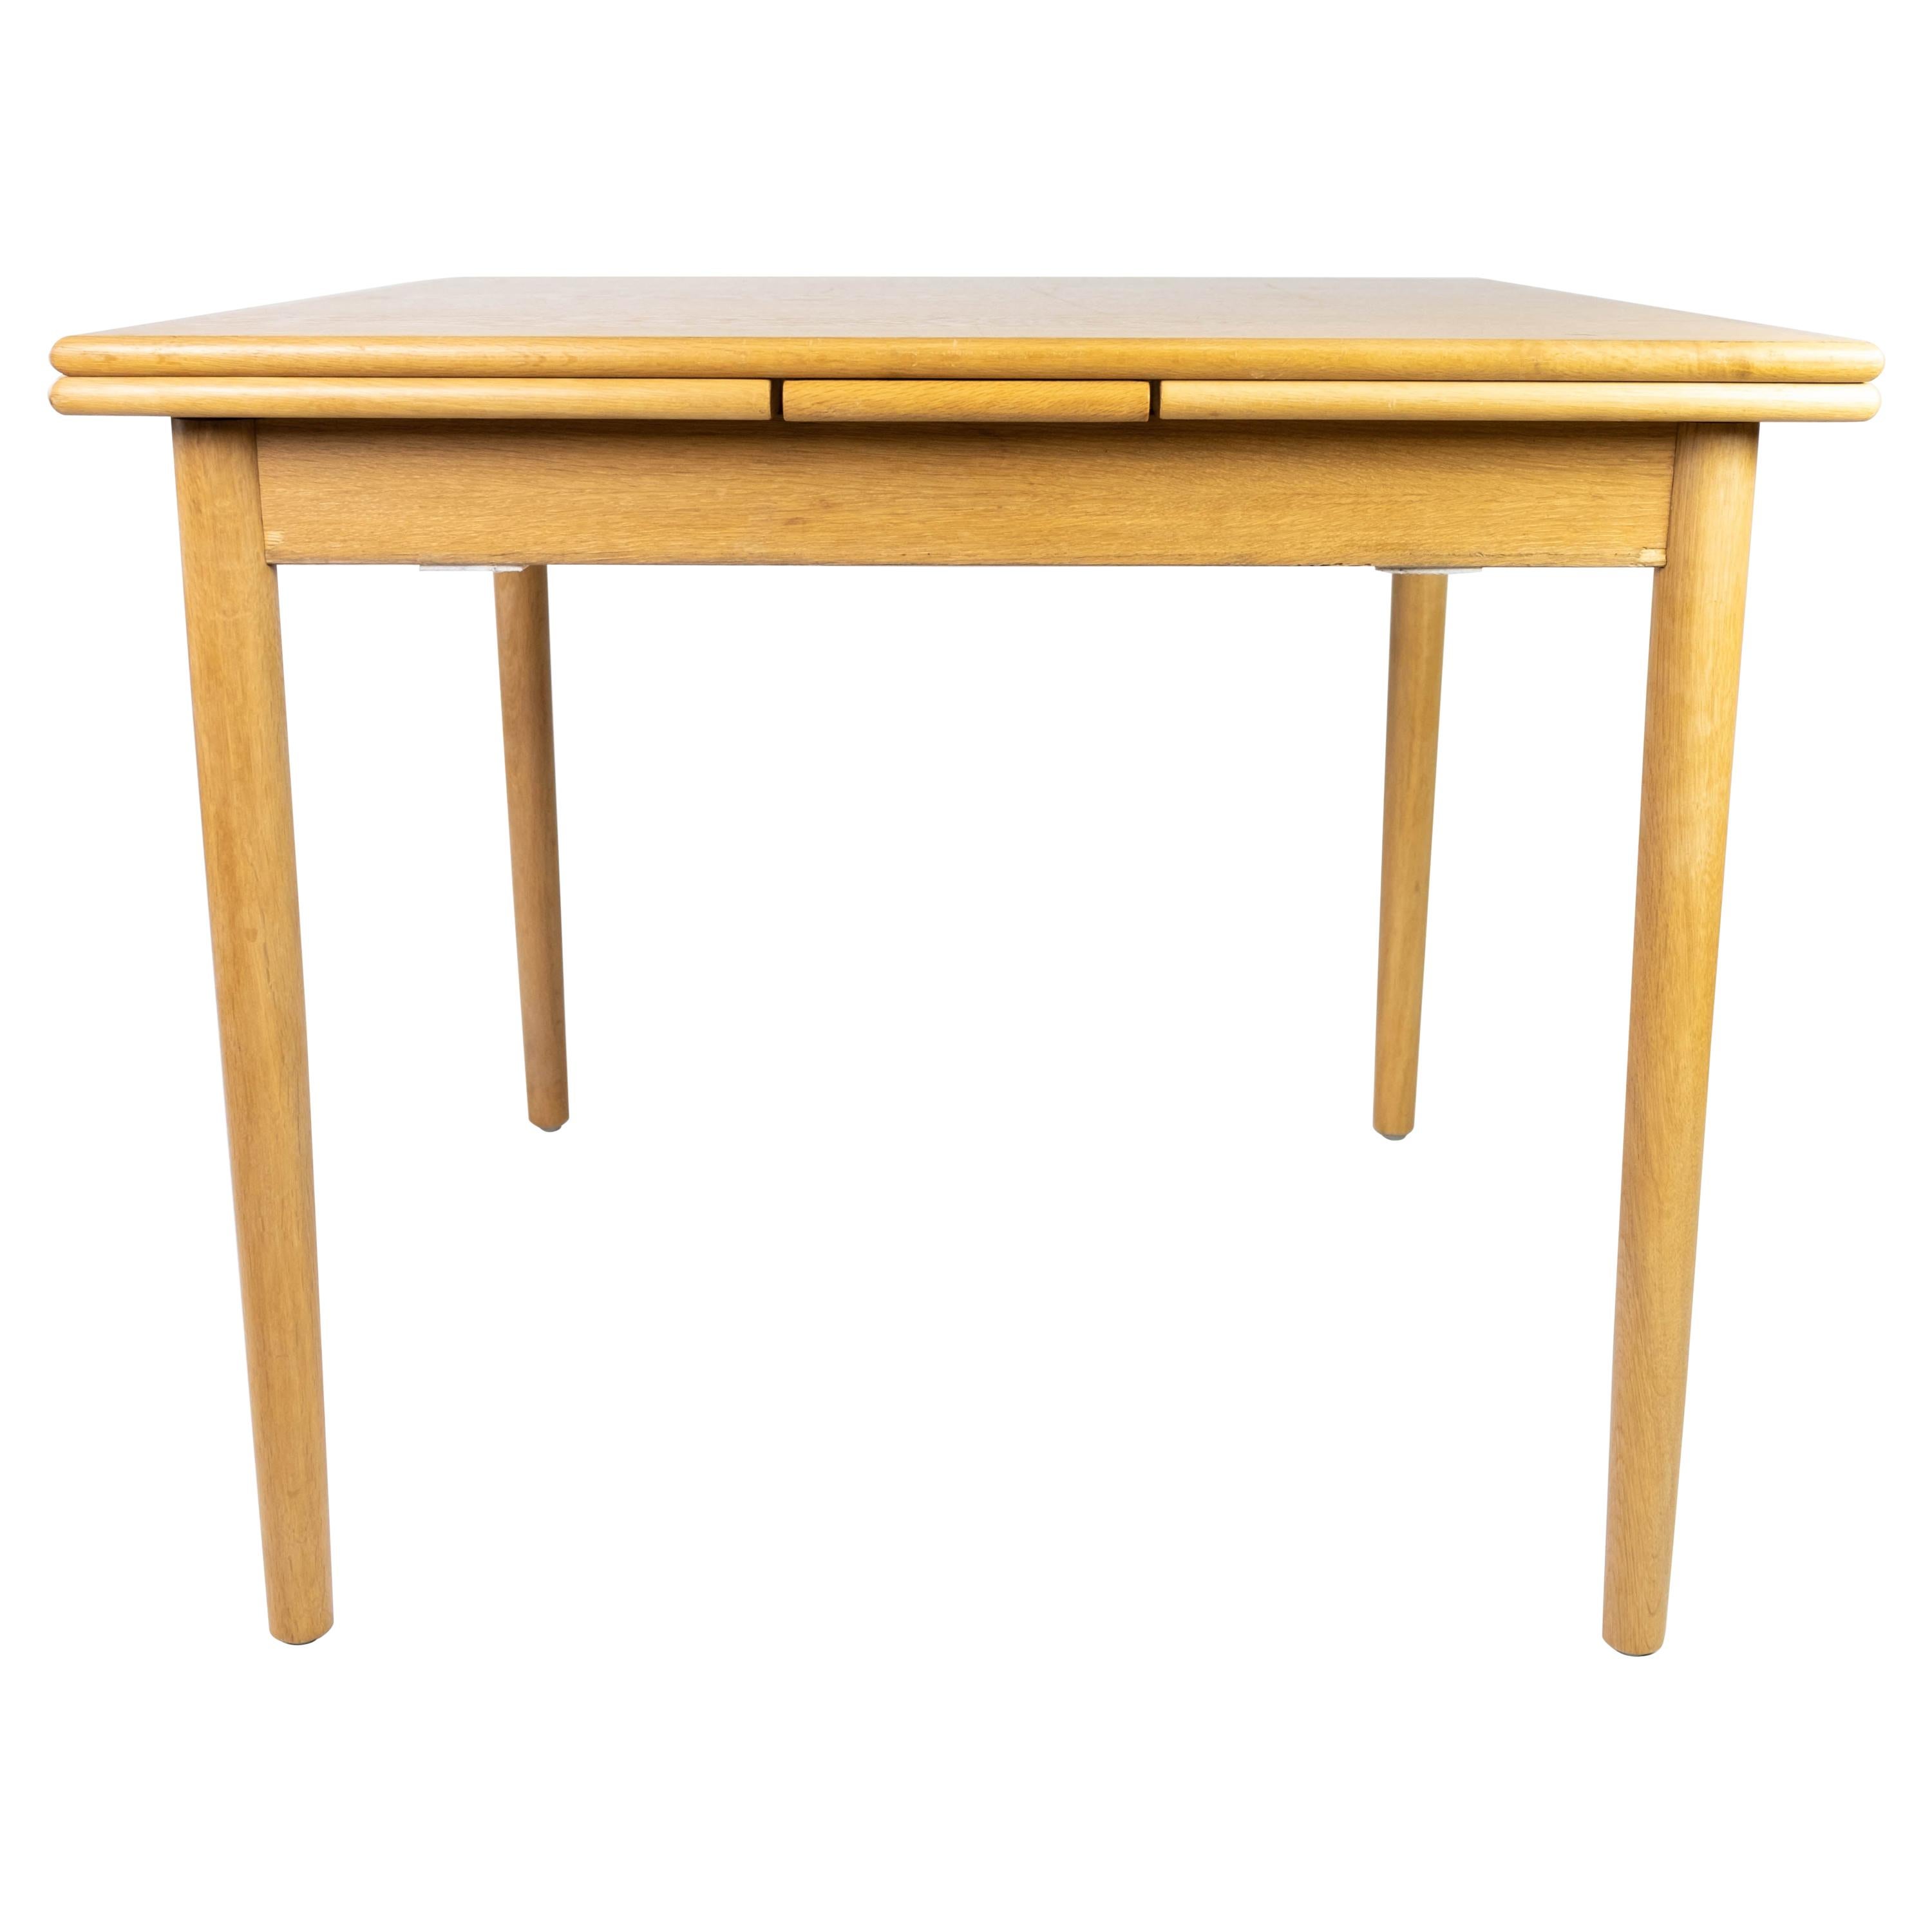 Dining Table in Oak with Extensions, of Danish Design from the 1960s